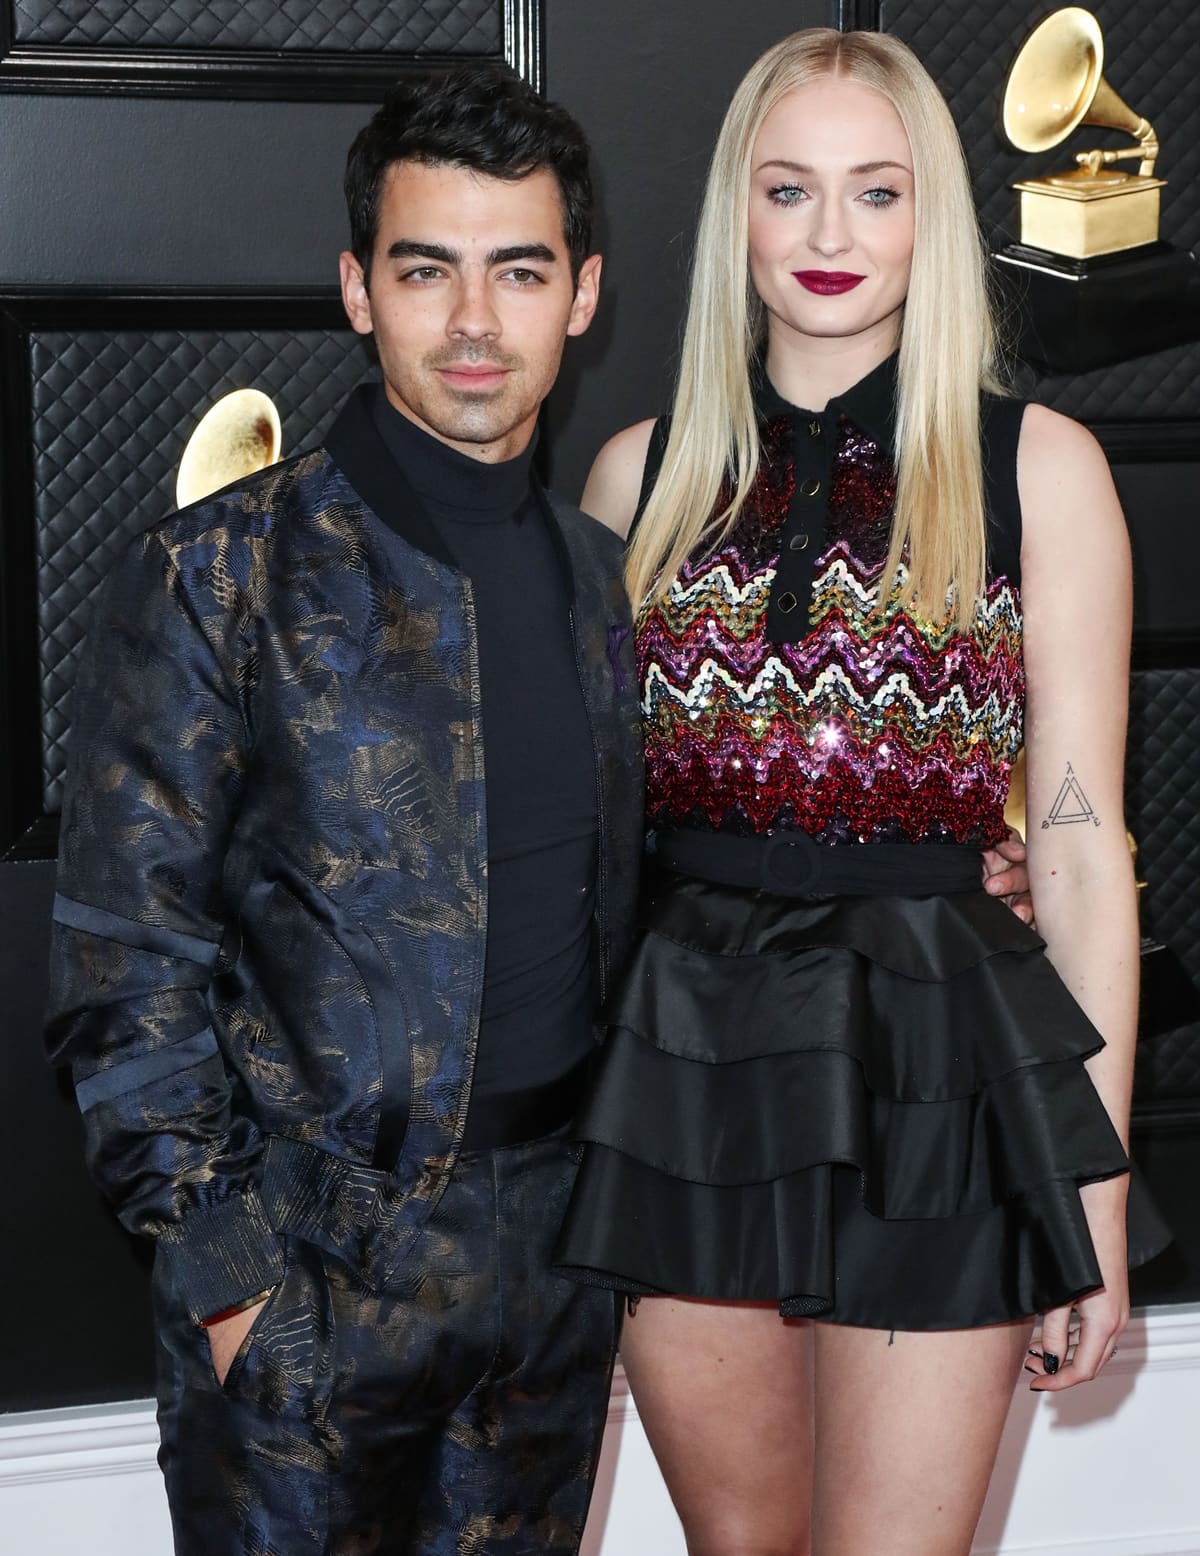 Even without wearing high heels, Sophie Turner still stands head and shoulders above Joe Jonas